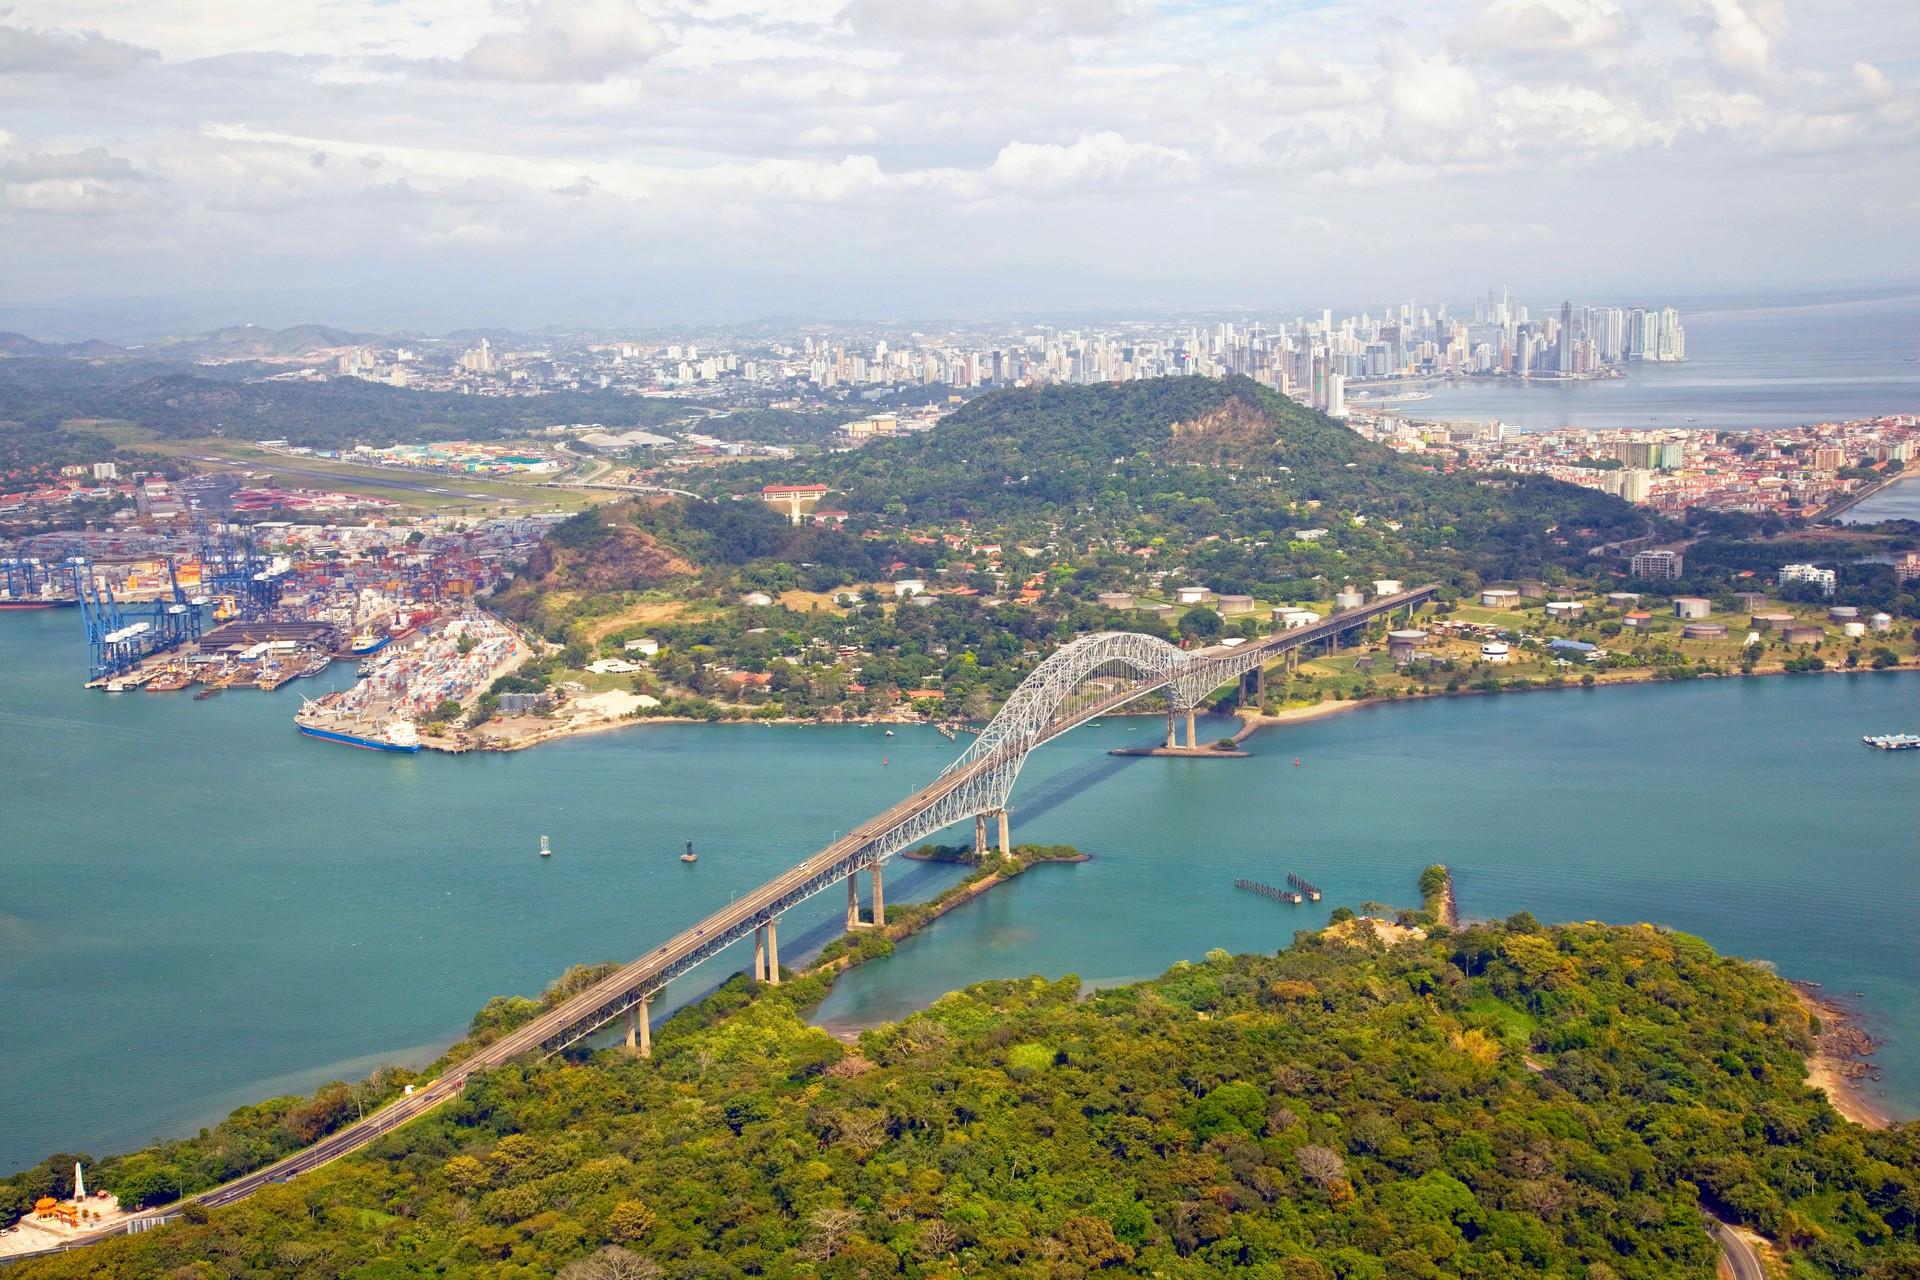 Aerial view of bridge in Panama City on a cloudy day